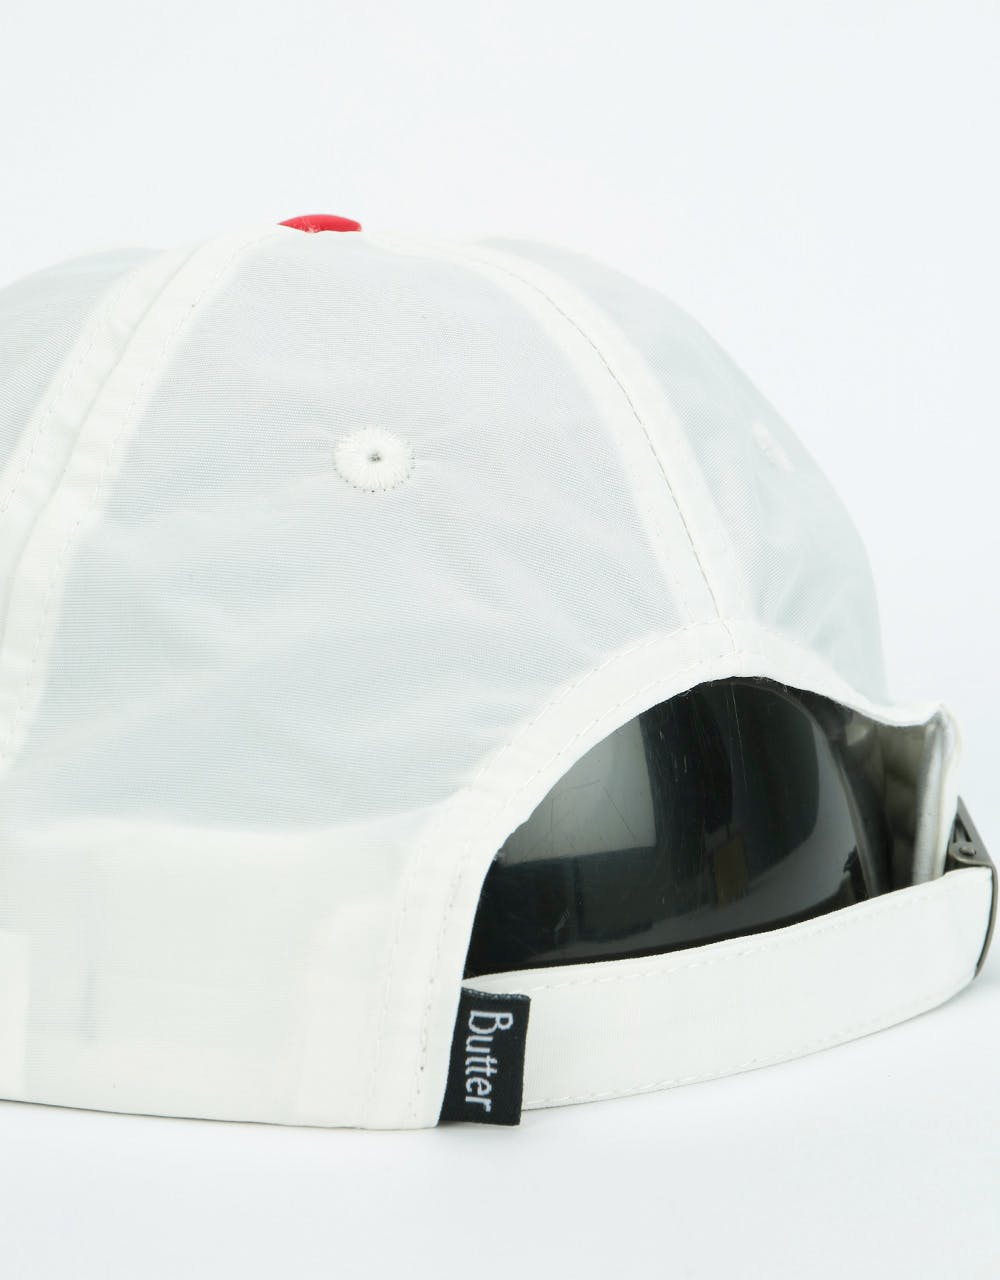 Butter Goods x FTC Flag 6 Panel Cap - Off White/Red